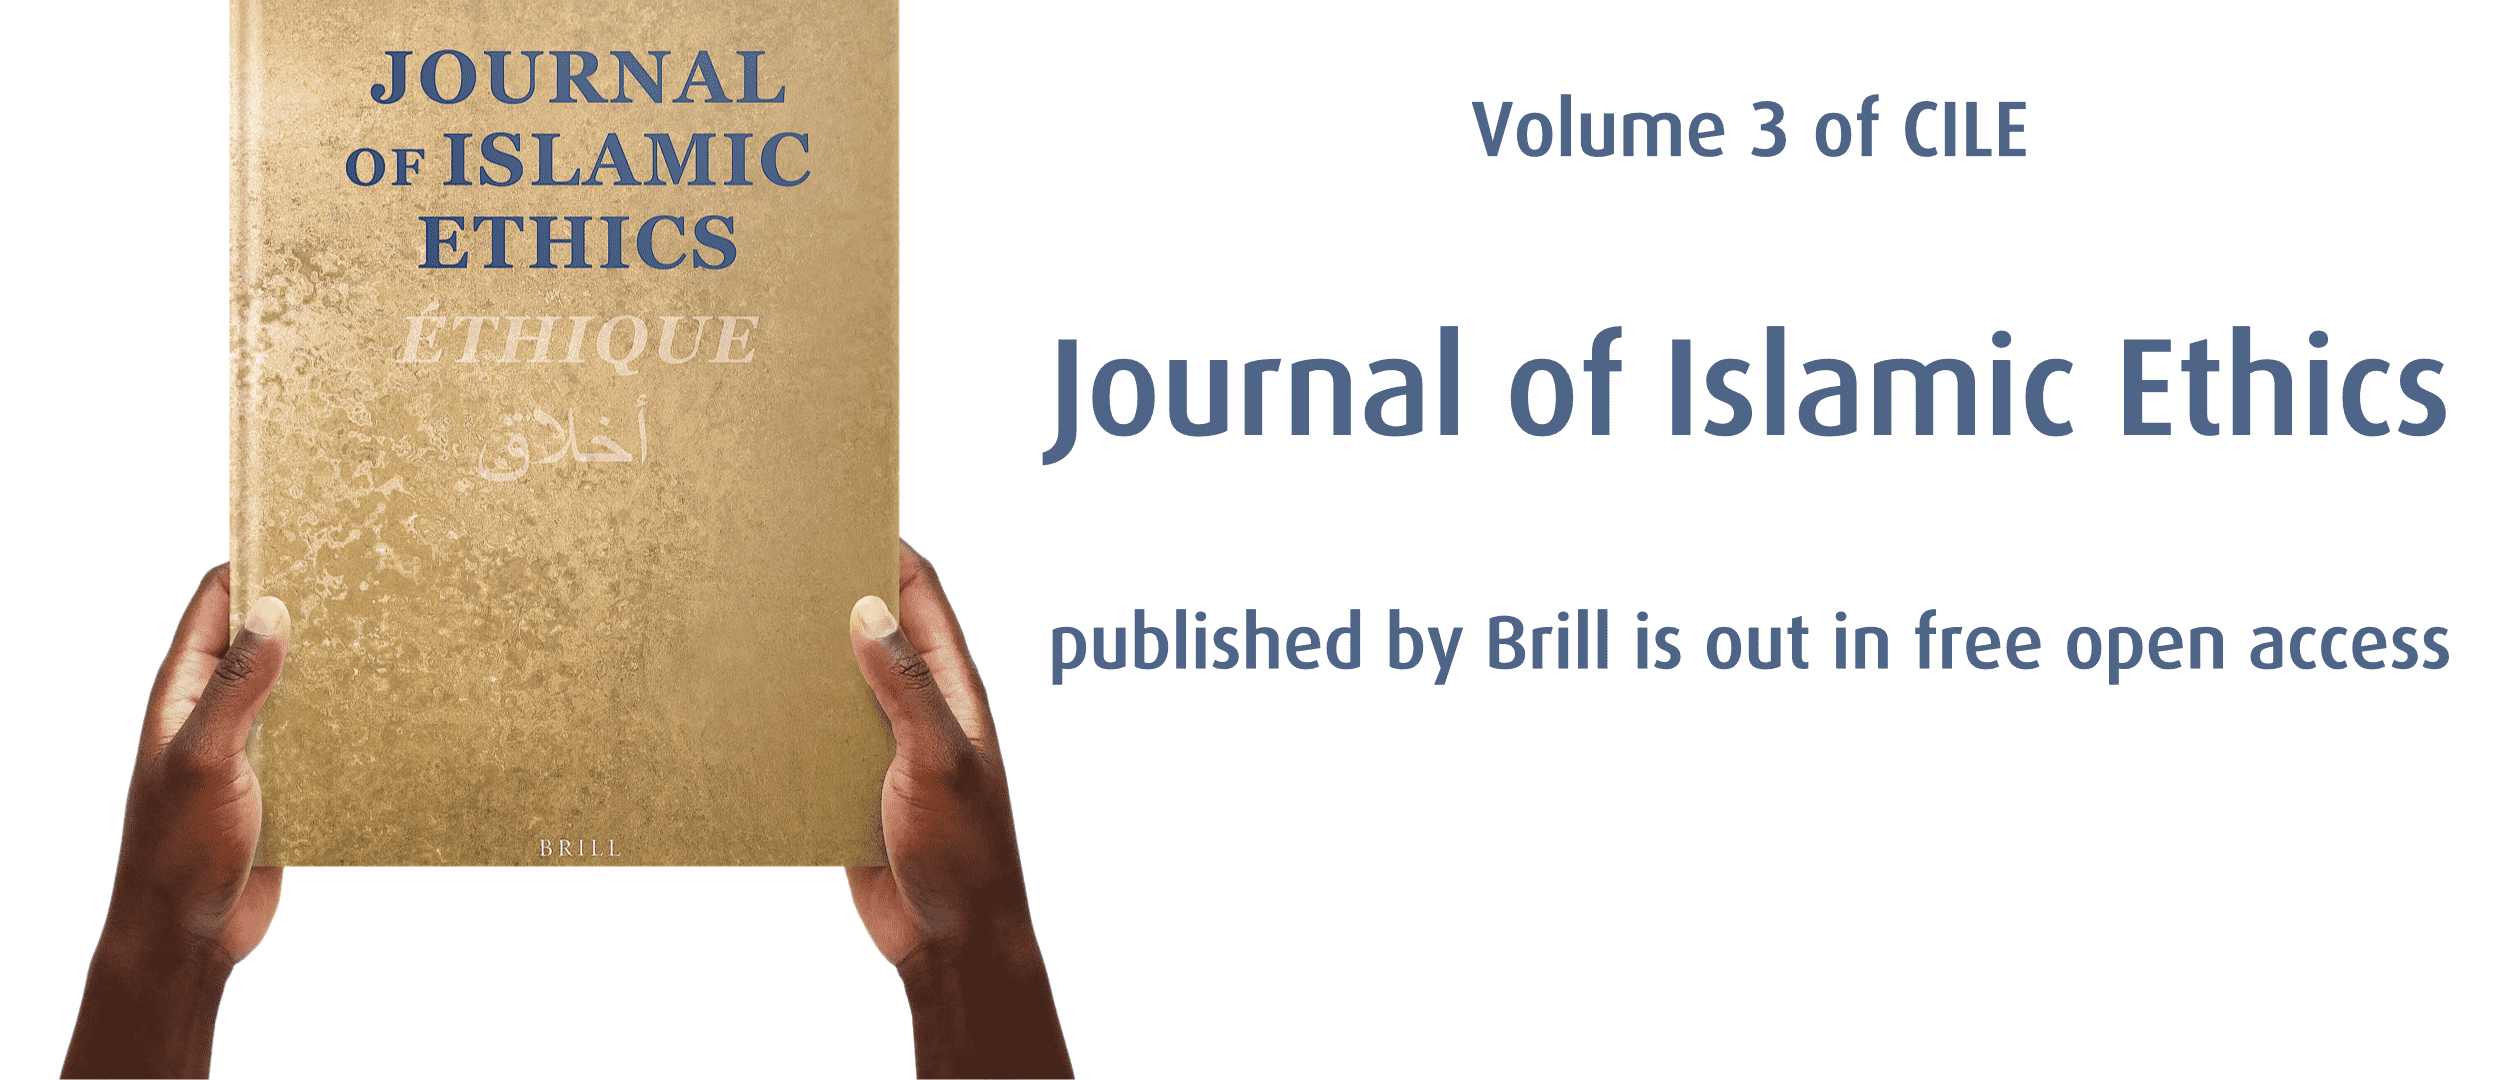 Volume 3 of “Journal of Islamic Ethics”: Contemporary ijtihād, ethics and modernity